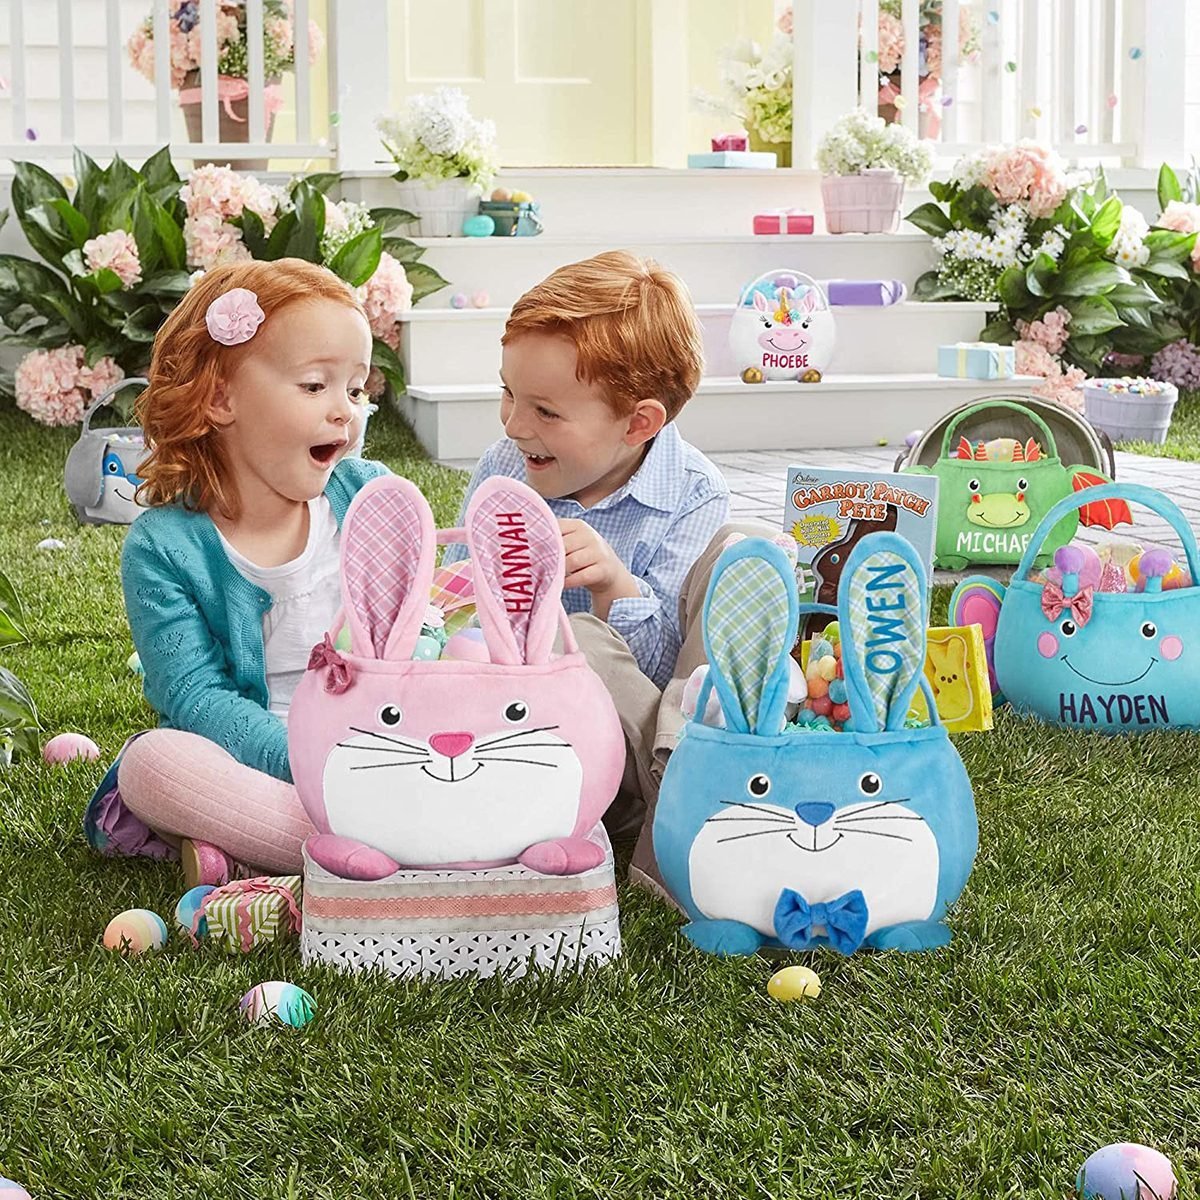 26 Fun and Creative Easter Basket Ideas for Kids